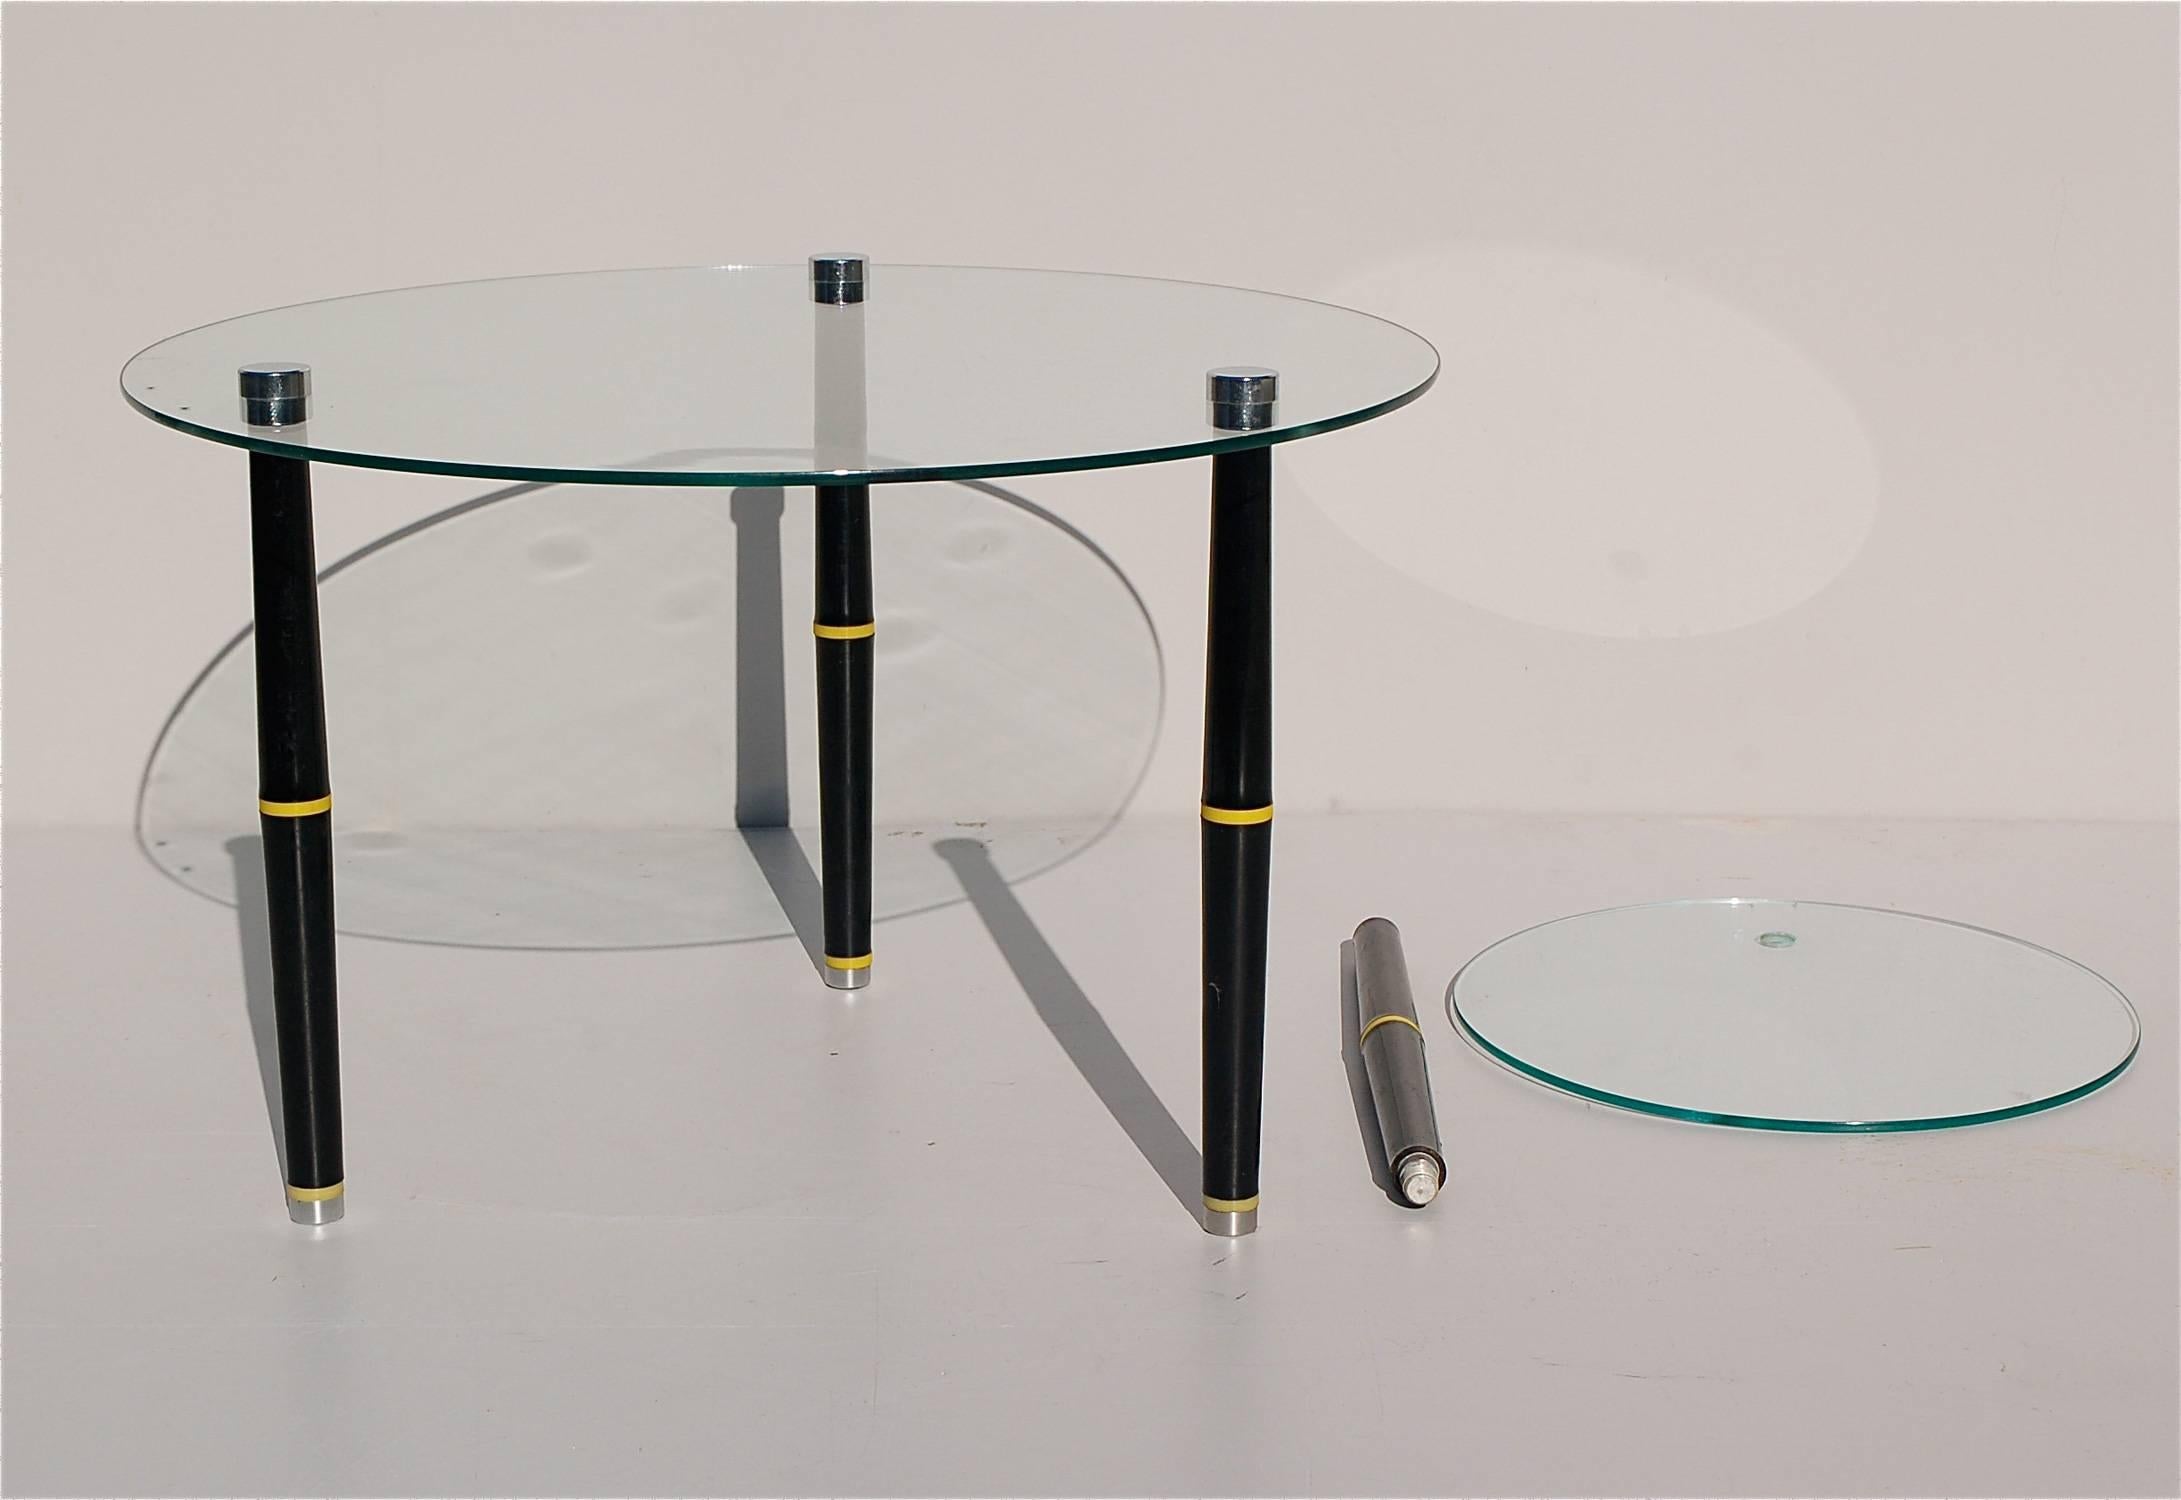 Mid-Century Modern Glass Side Table with Black Colored Legs, Mid-20th Century, Italy